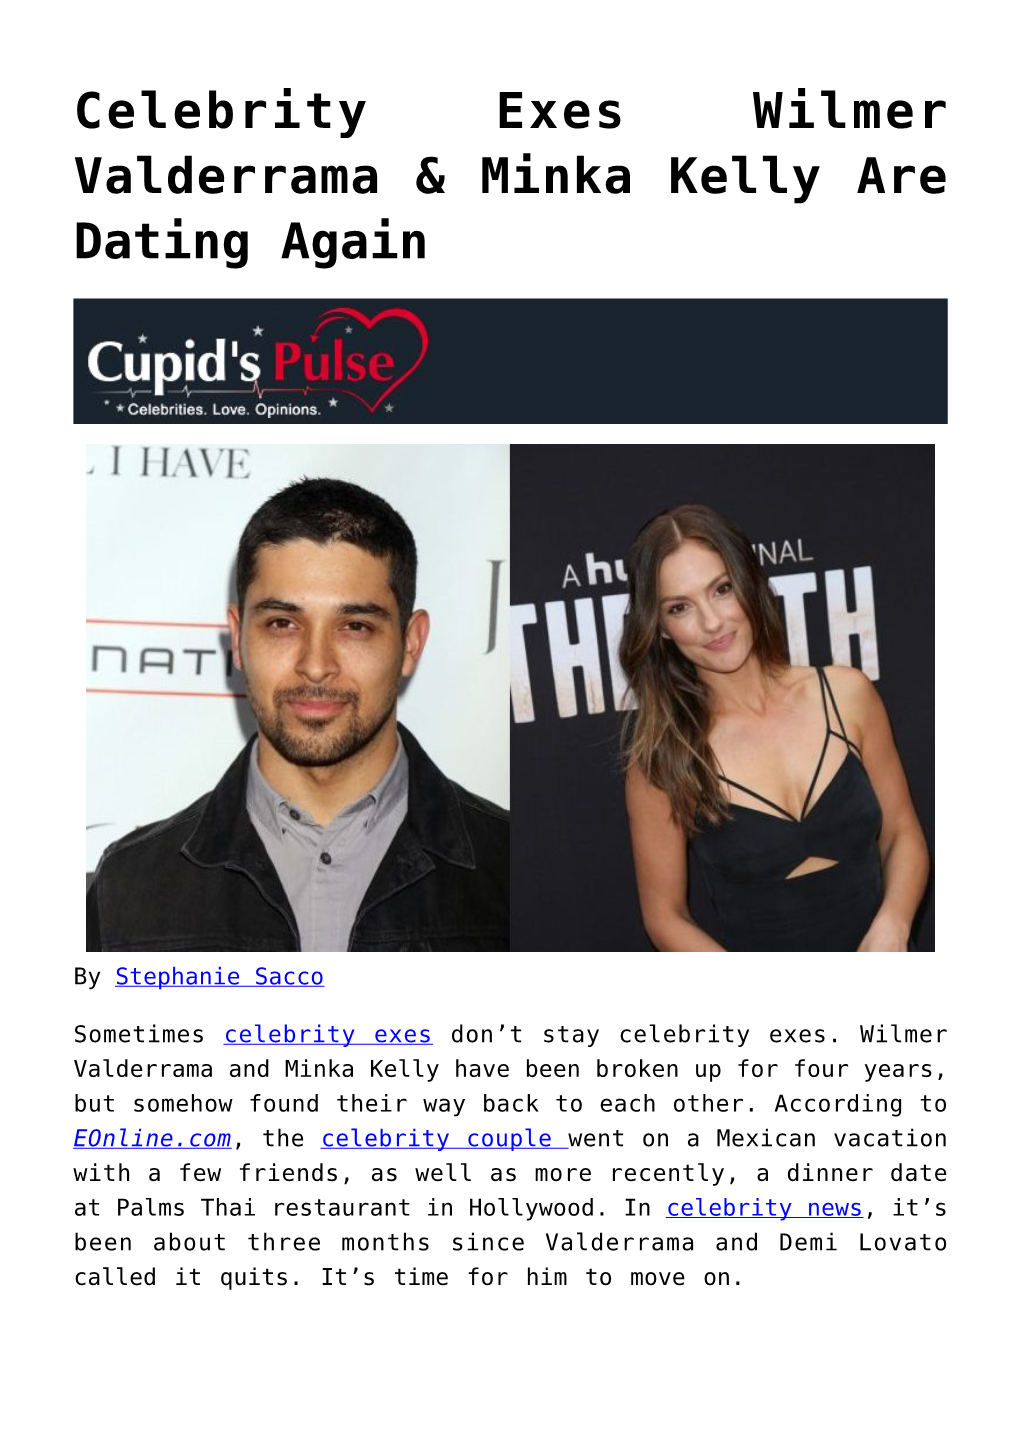 Minka Kelly Are Dating Again,New Celebrity Couple